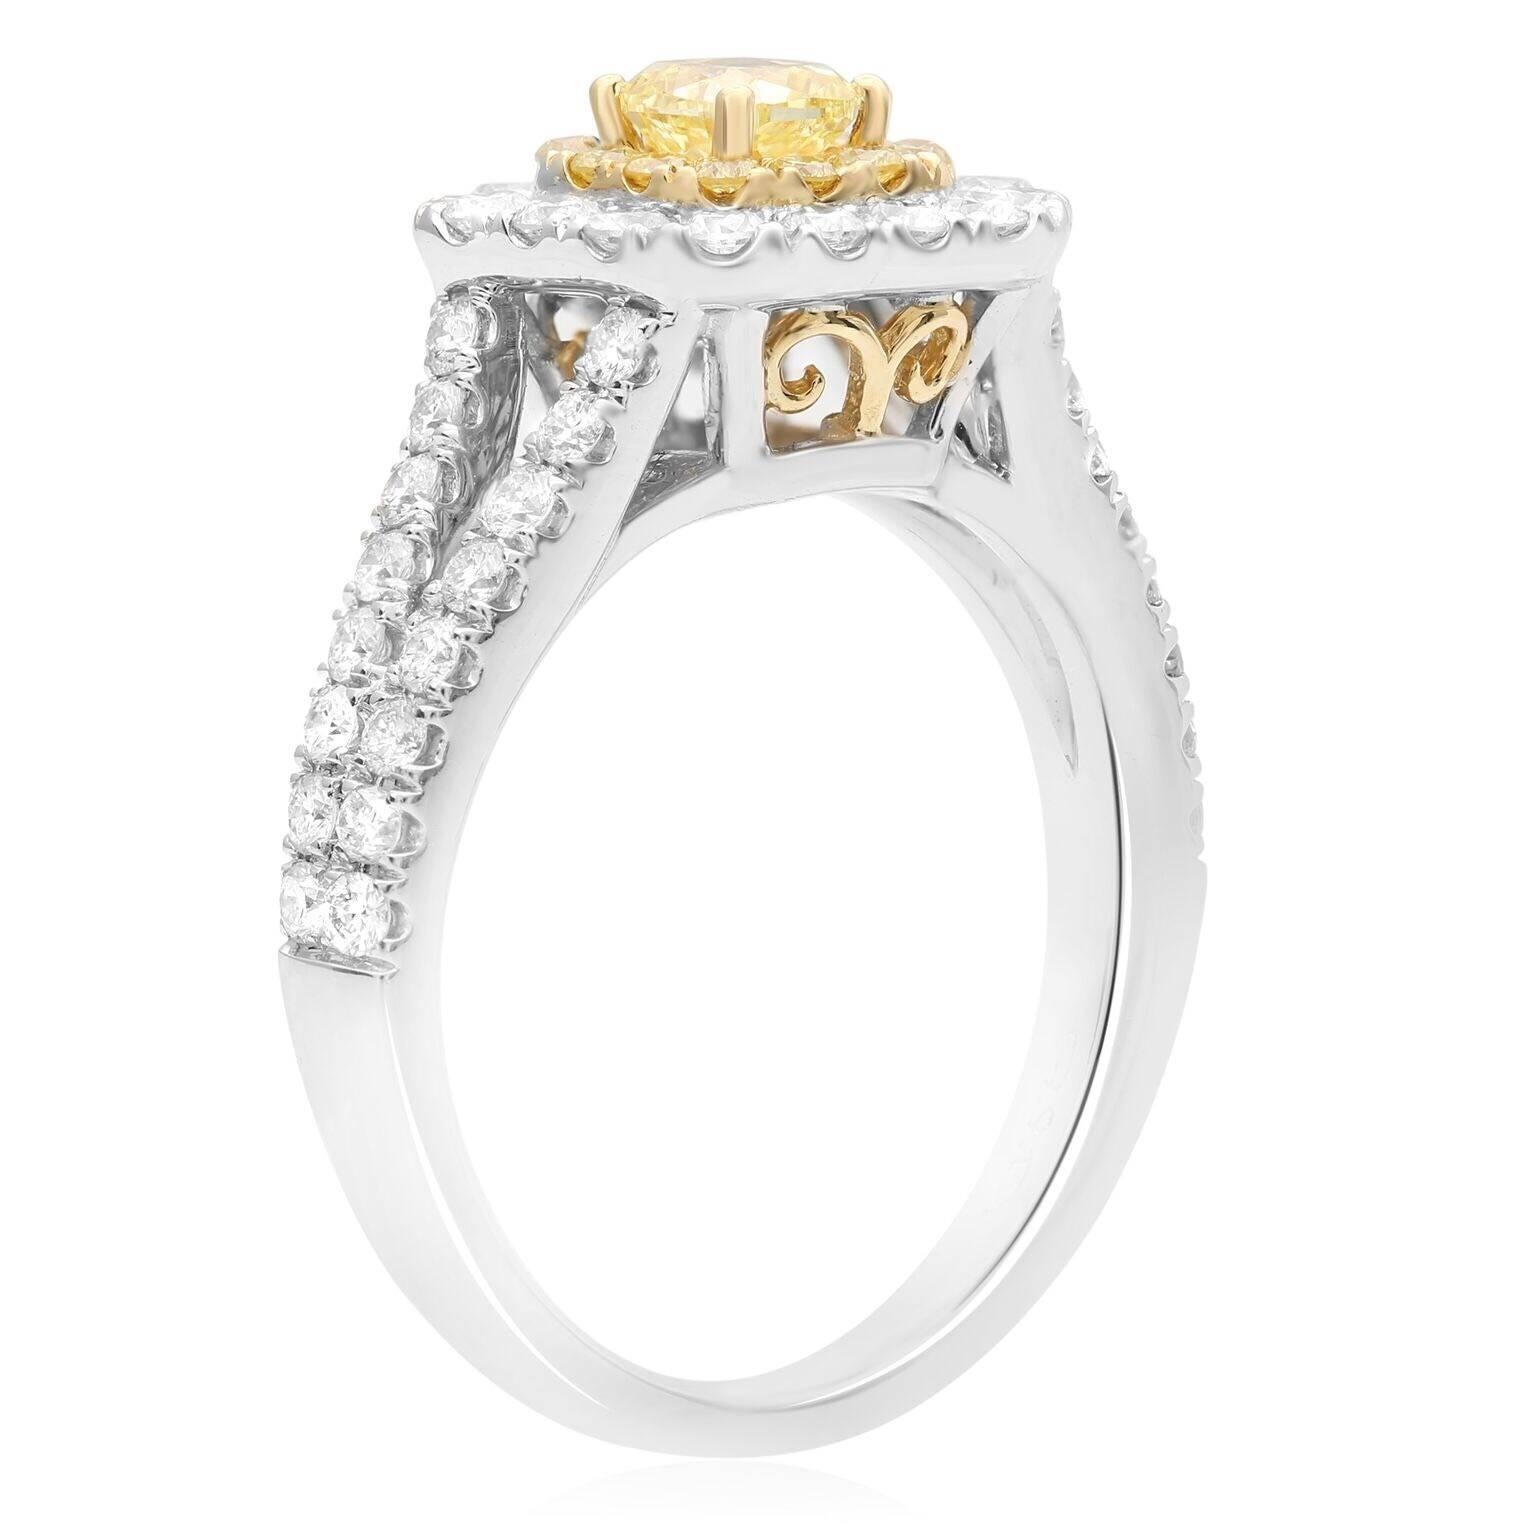 Fancy Yellow Cushion Cut Diamond with a pave halo of fancy yellow diamonds and a second halo of perfectly matched white diamonds. The double halo around the center stone causes it to pop and stand out as a beautiful piece of diamond jewelry.